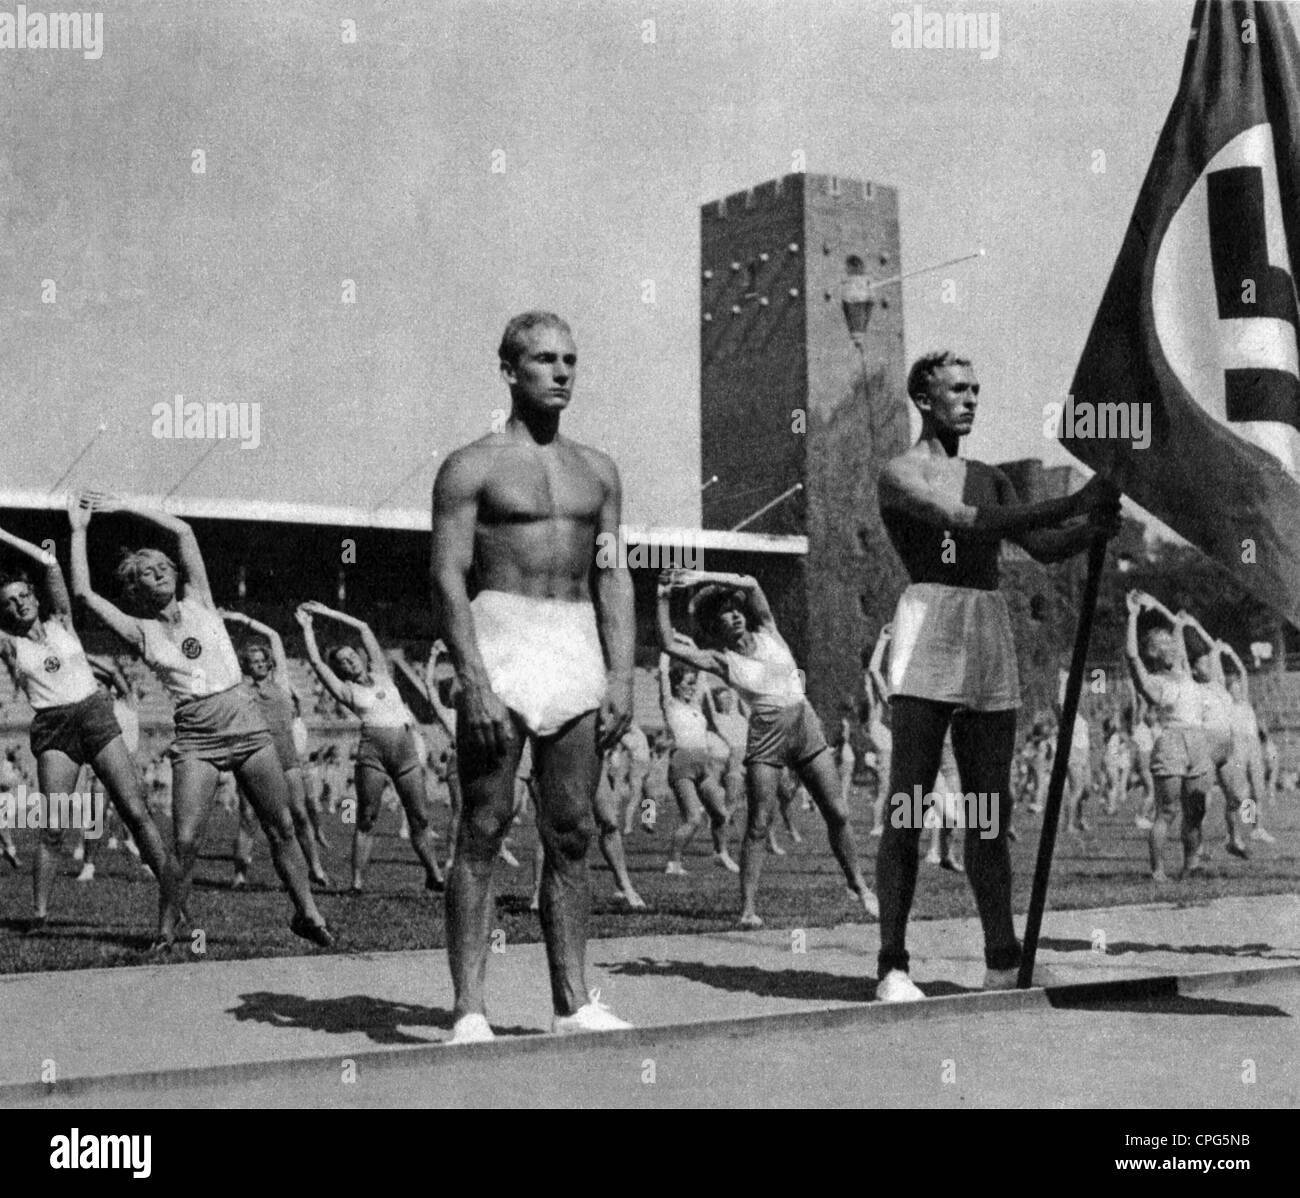 sports, gymnastics, German gymnasts, 1930s, Additional-Rights-Clearences-Not Available Stock Photo